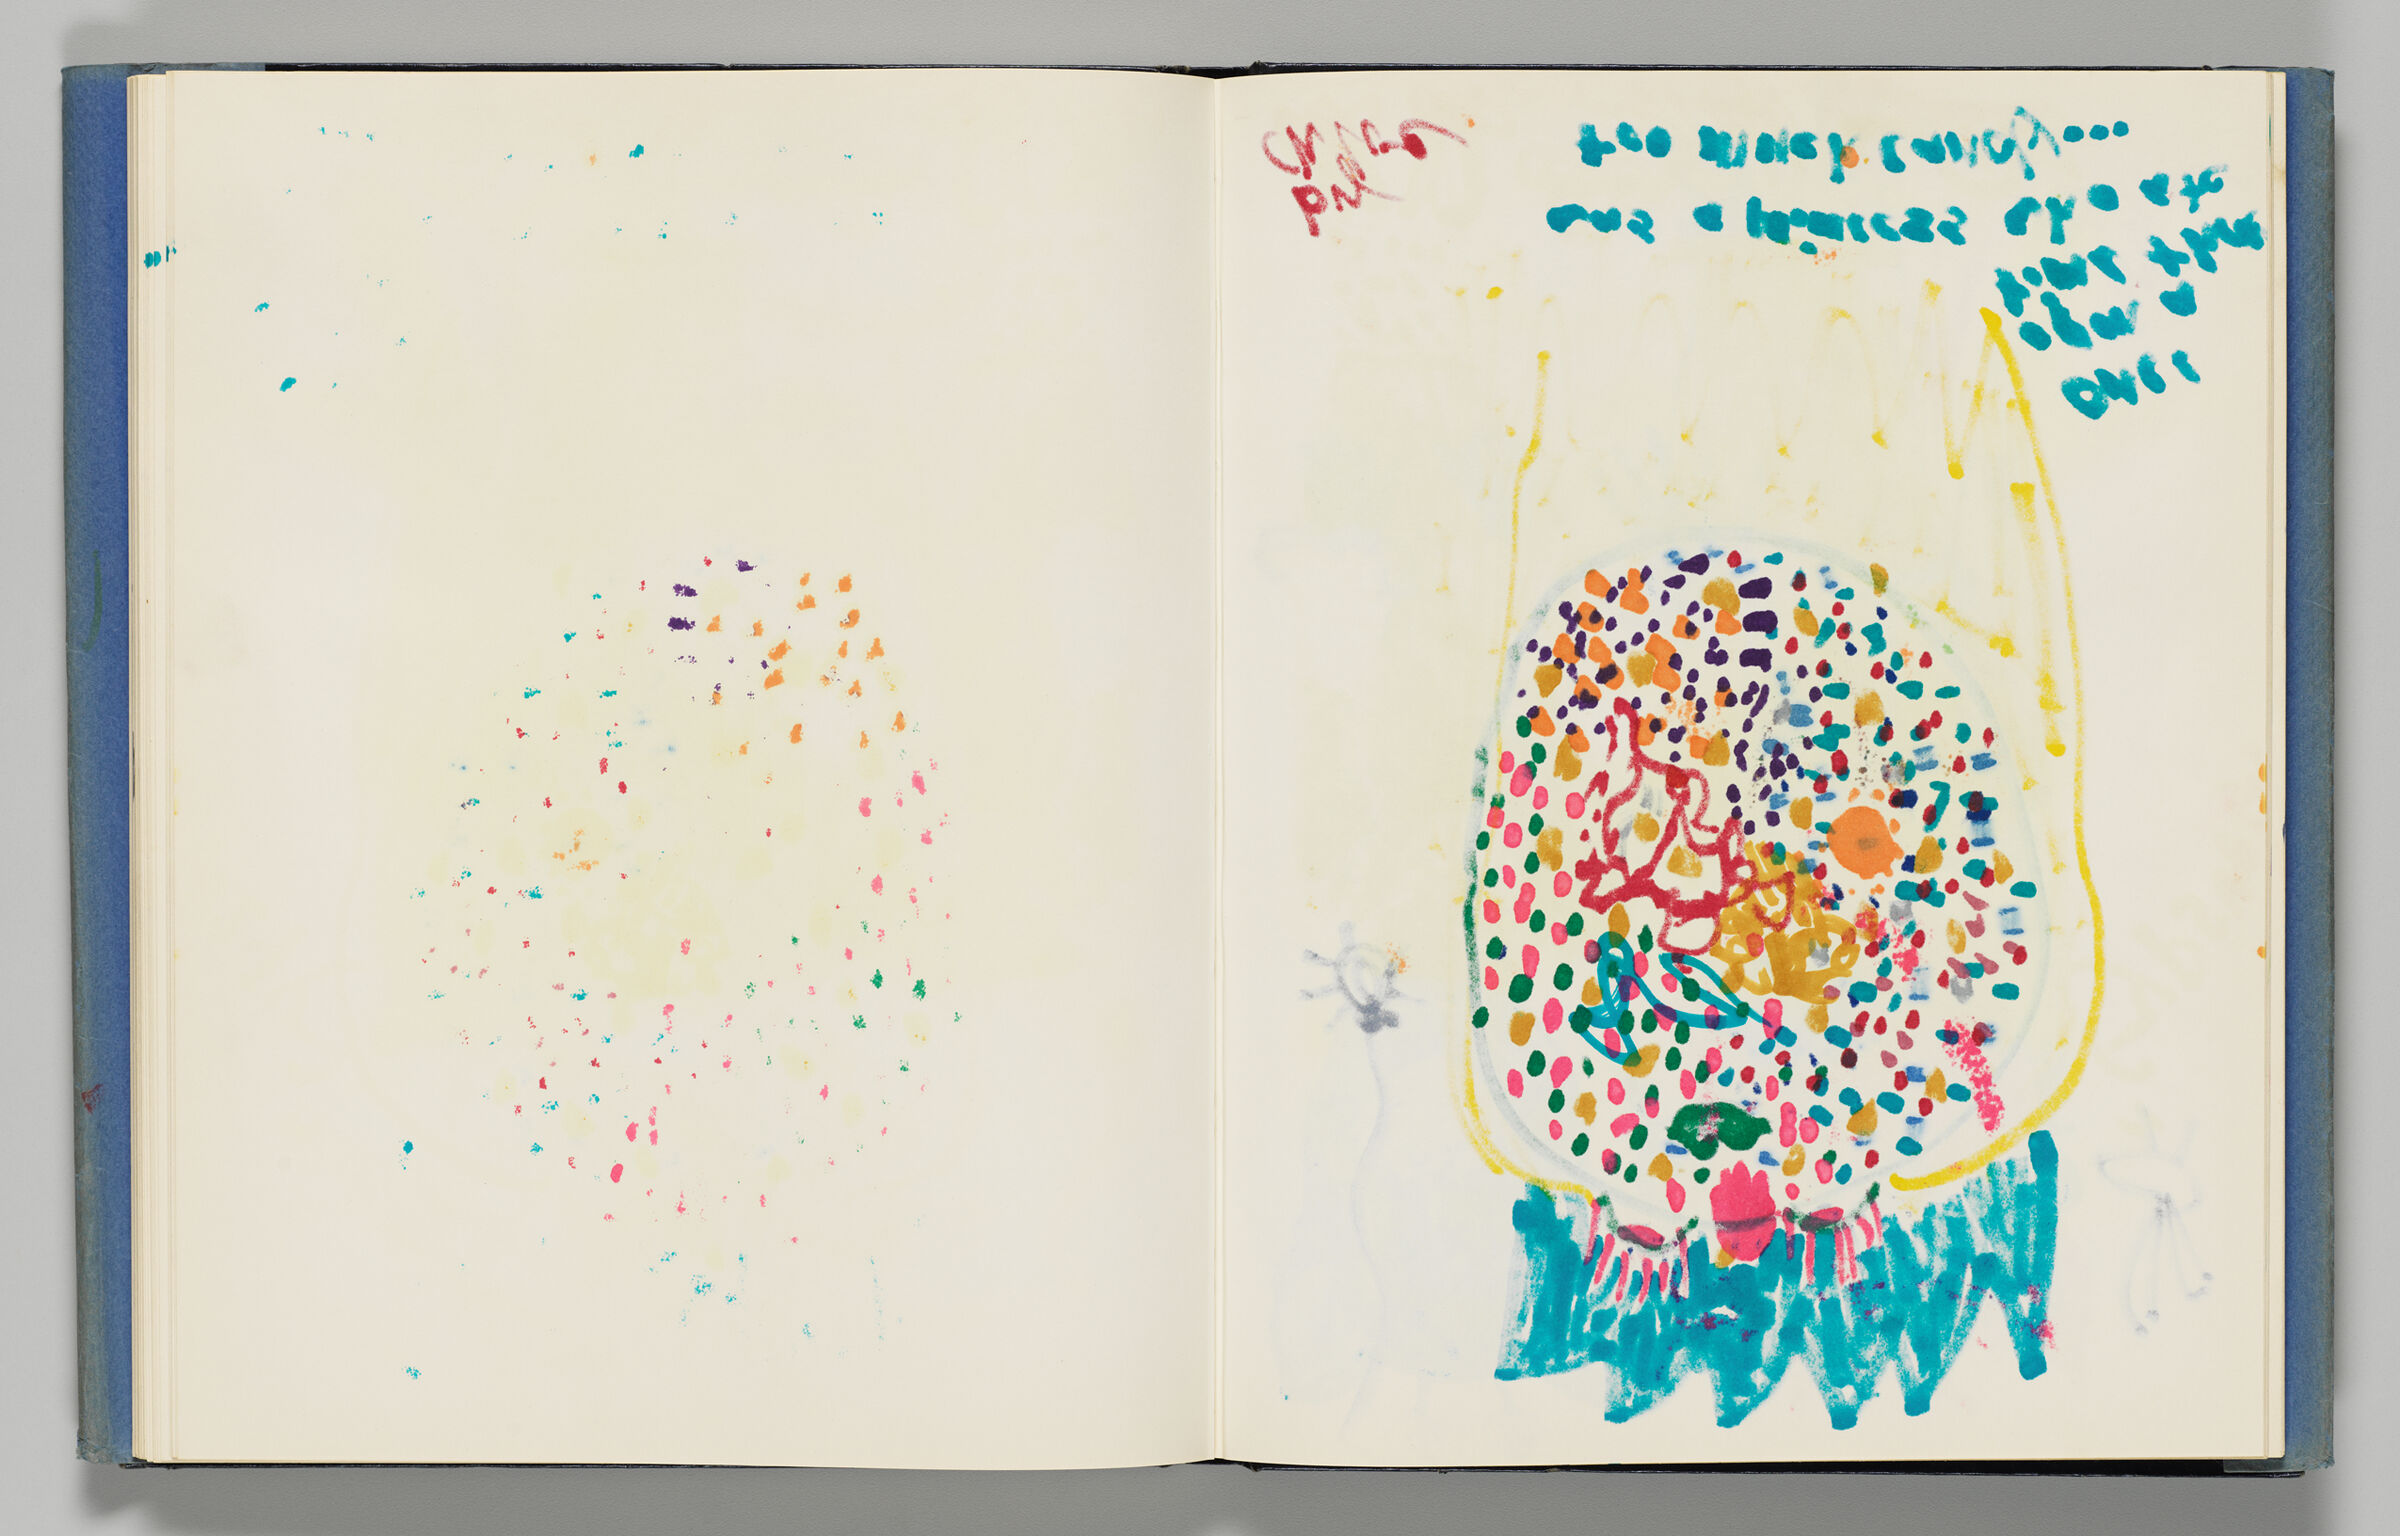 Untitled (Blank With Color Transfer, Left Page); Untitled (Bleed-Through Of Following Page, Right Page)